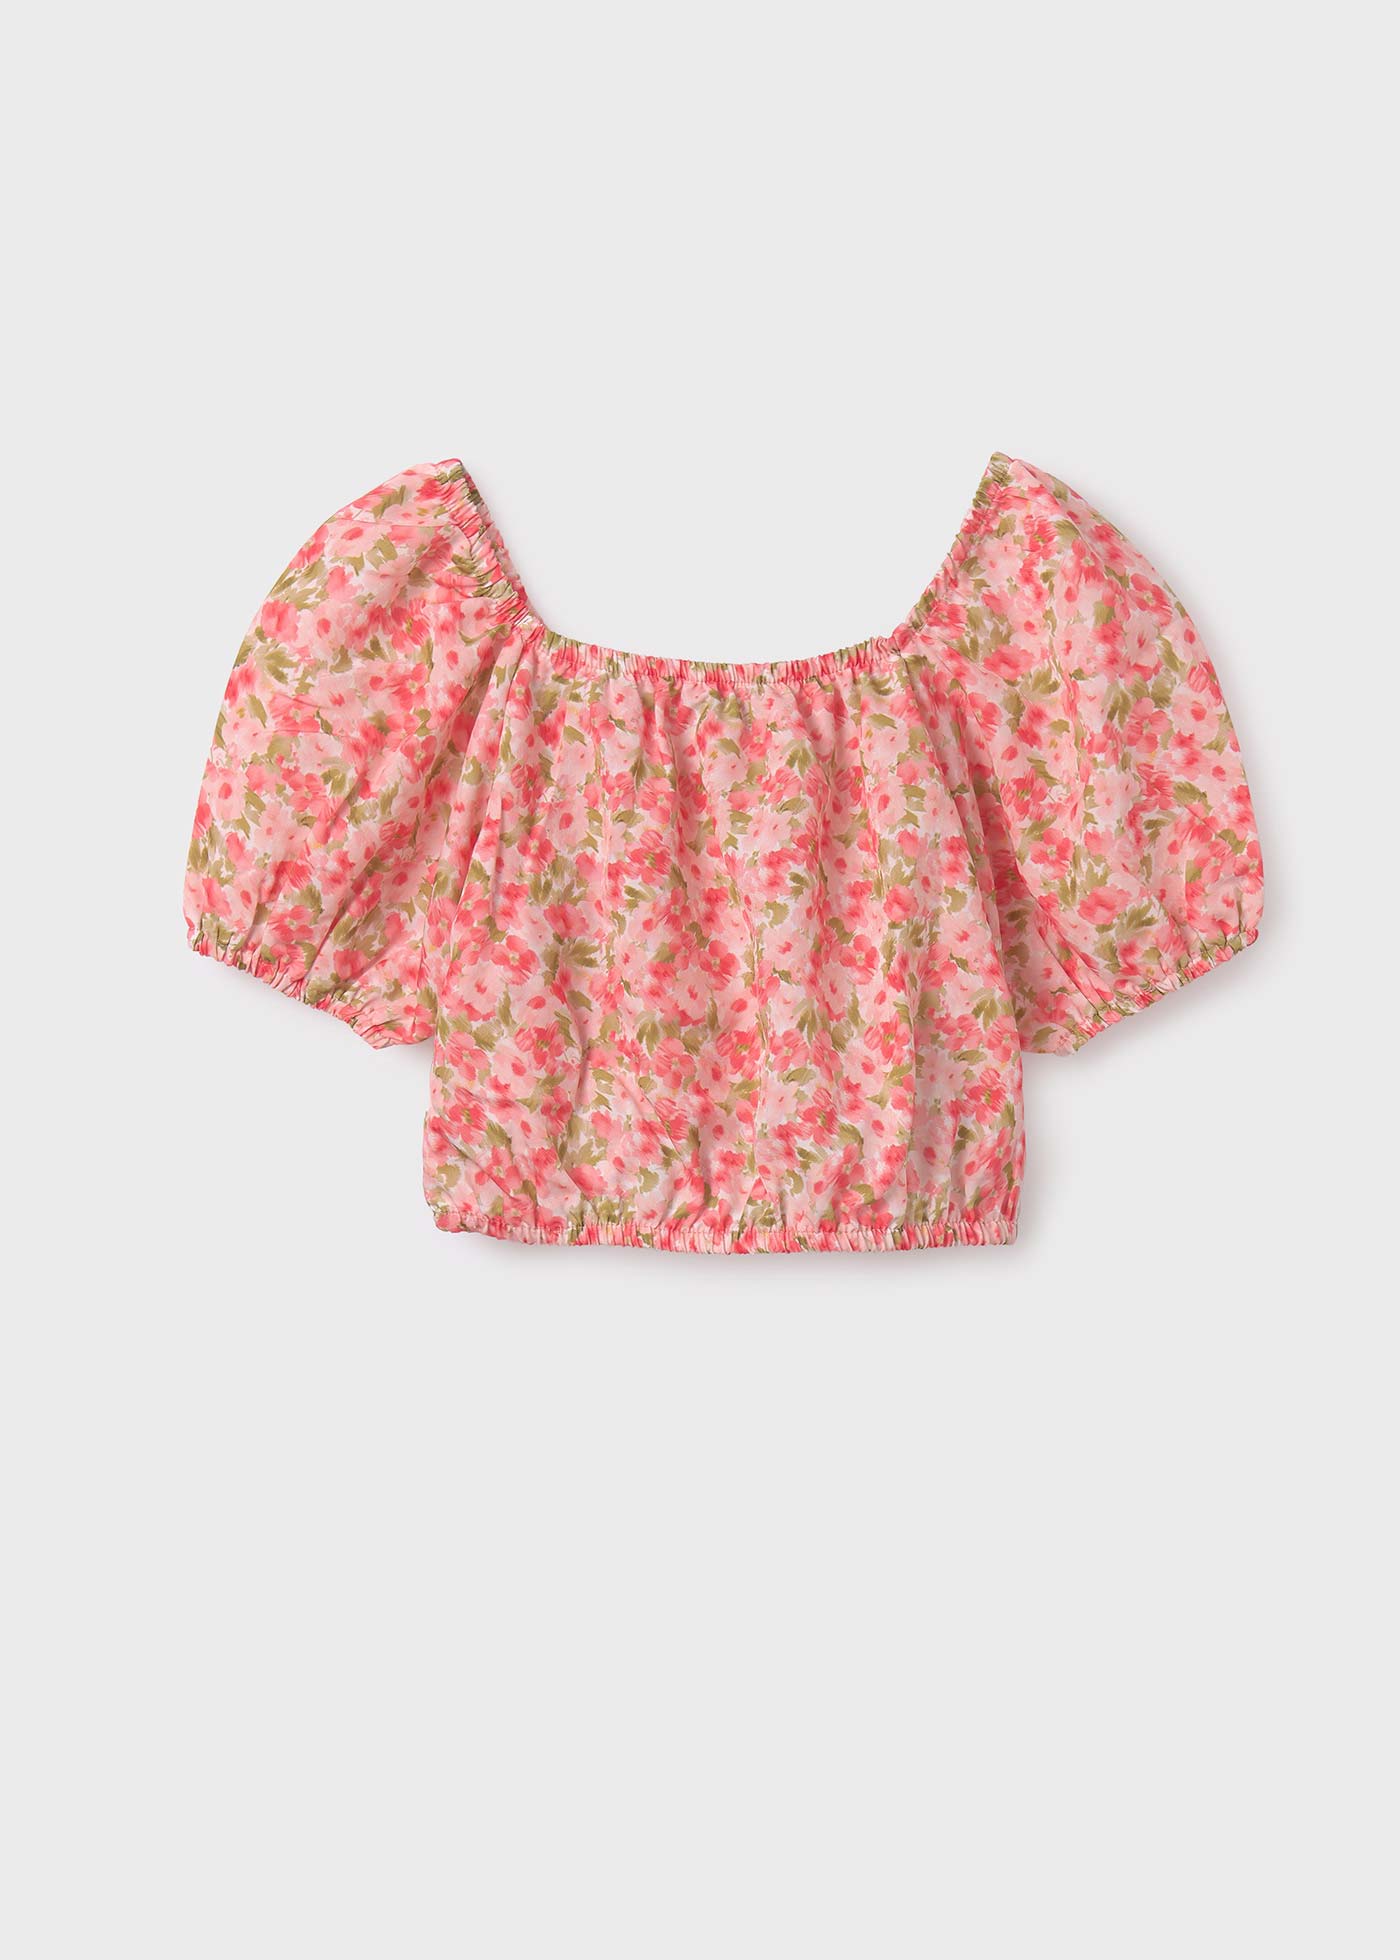 Girls floral top